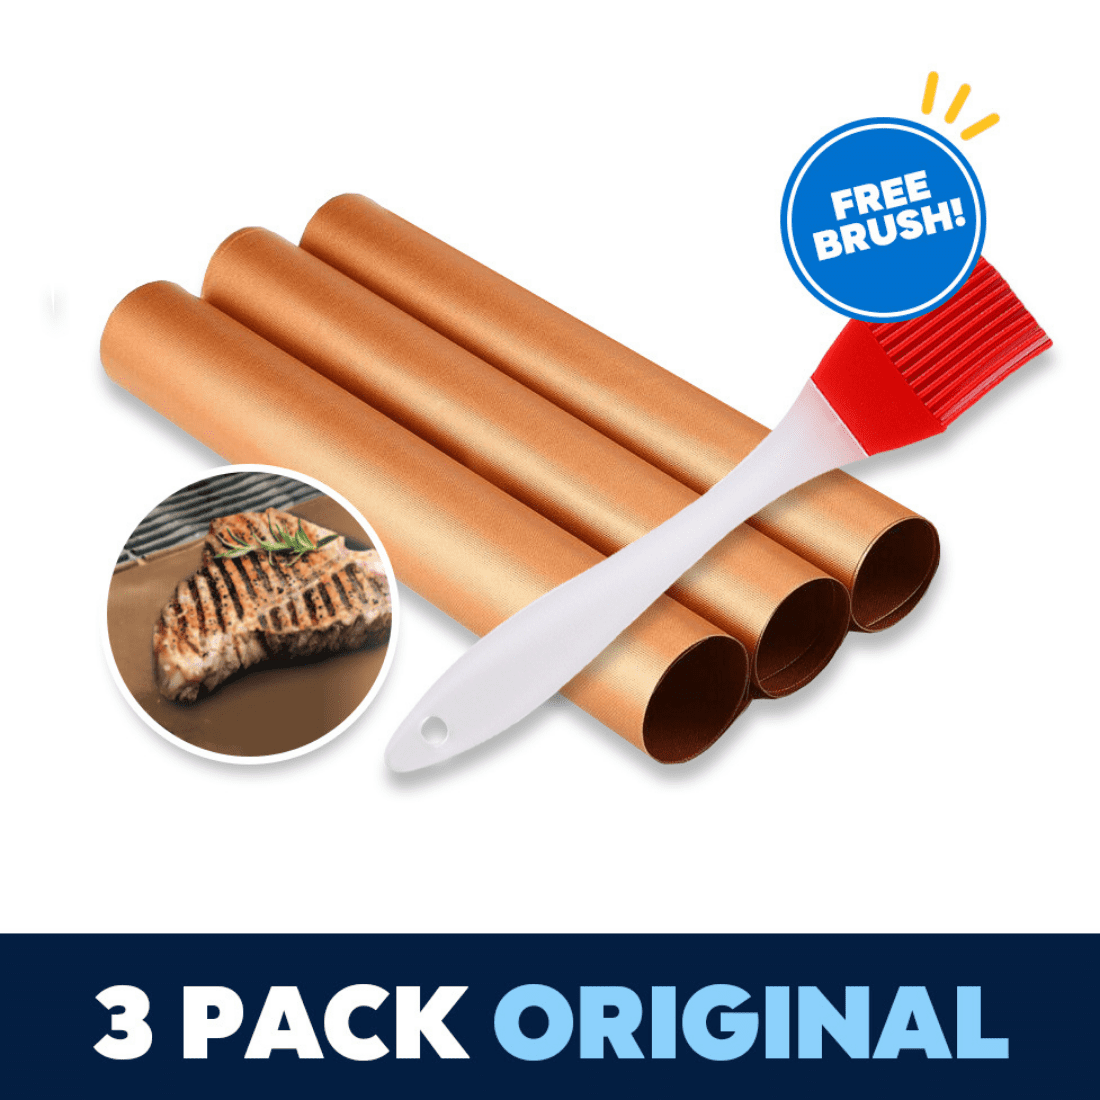 Goodies Bay BBQ Grill Mats Set of 3 with 2 Silicone Brushes 100% Non Stick Reusable and Easy to Clean Outdoor Bake Mat 15.75 x 13 Inch Copper 